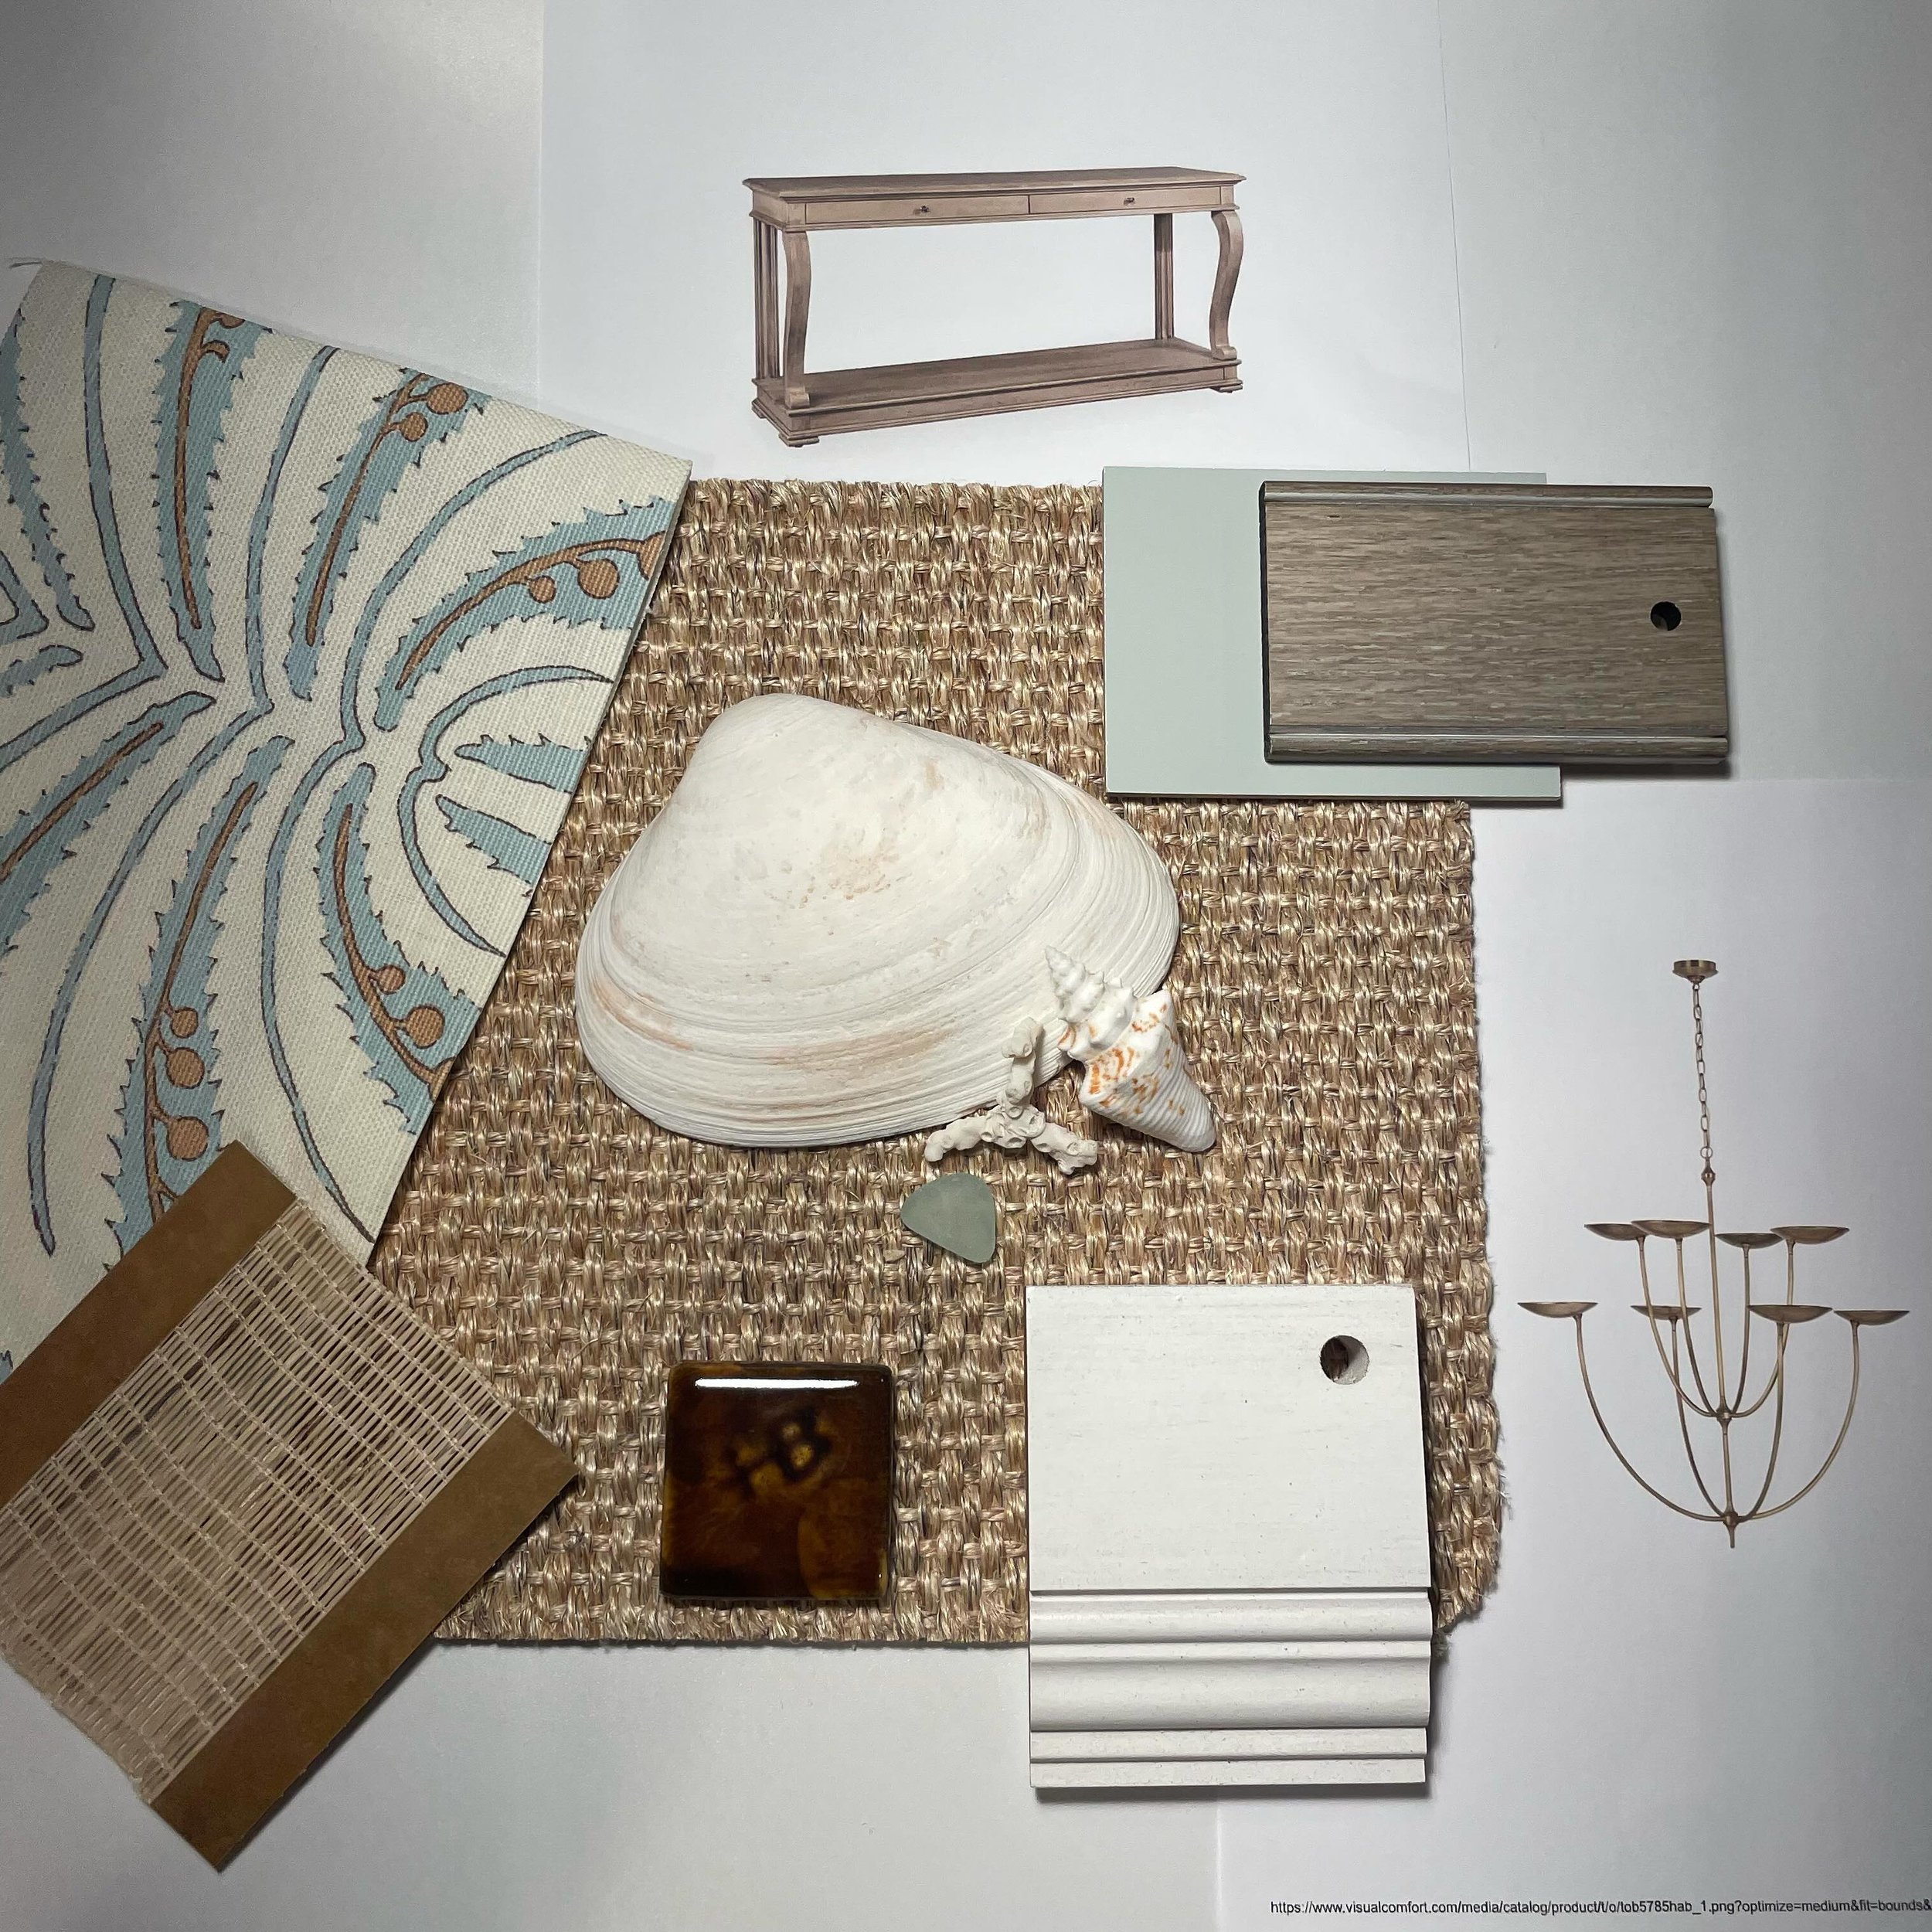 Counting down the days to summer with this East Hampton project in the works! So excited to see this coming together.

#easthampton #interiors #foyerdesign #njinteriordesign #interiorstyle #flatlay #texture #designinspo #material